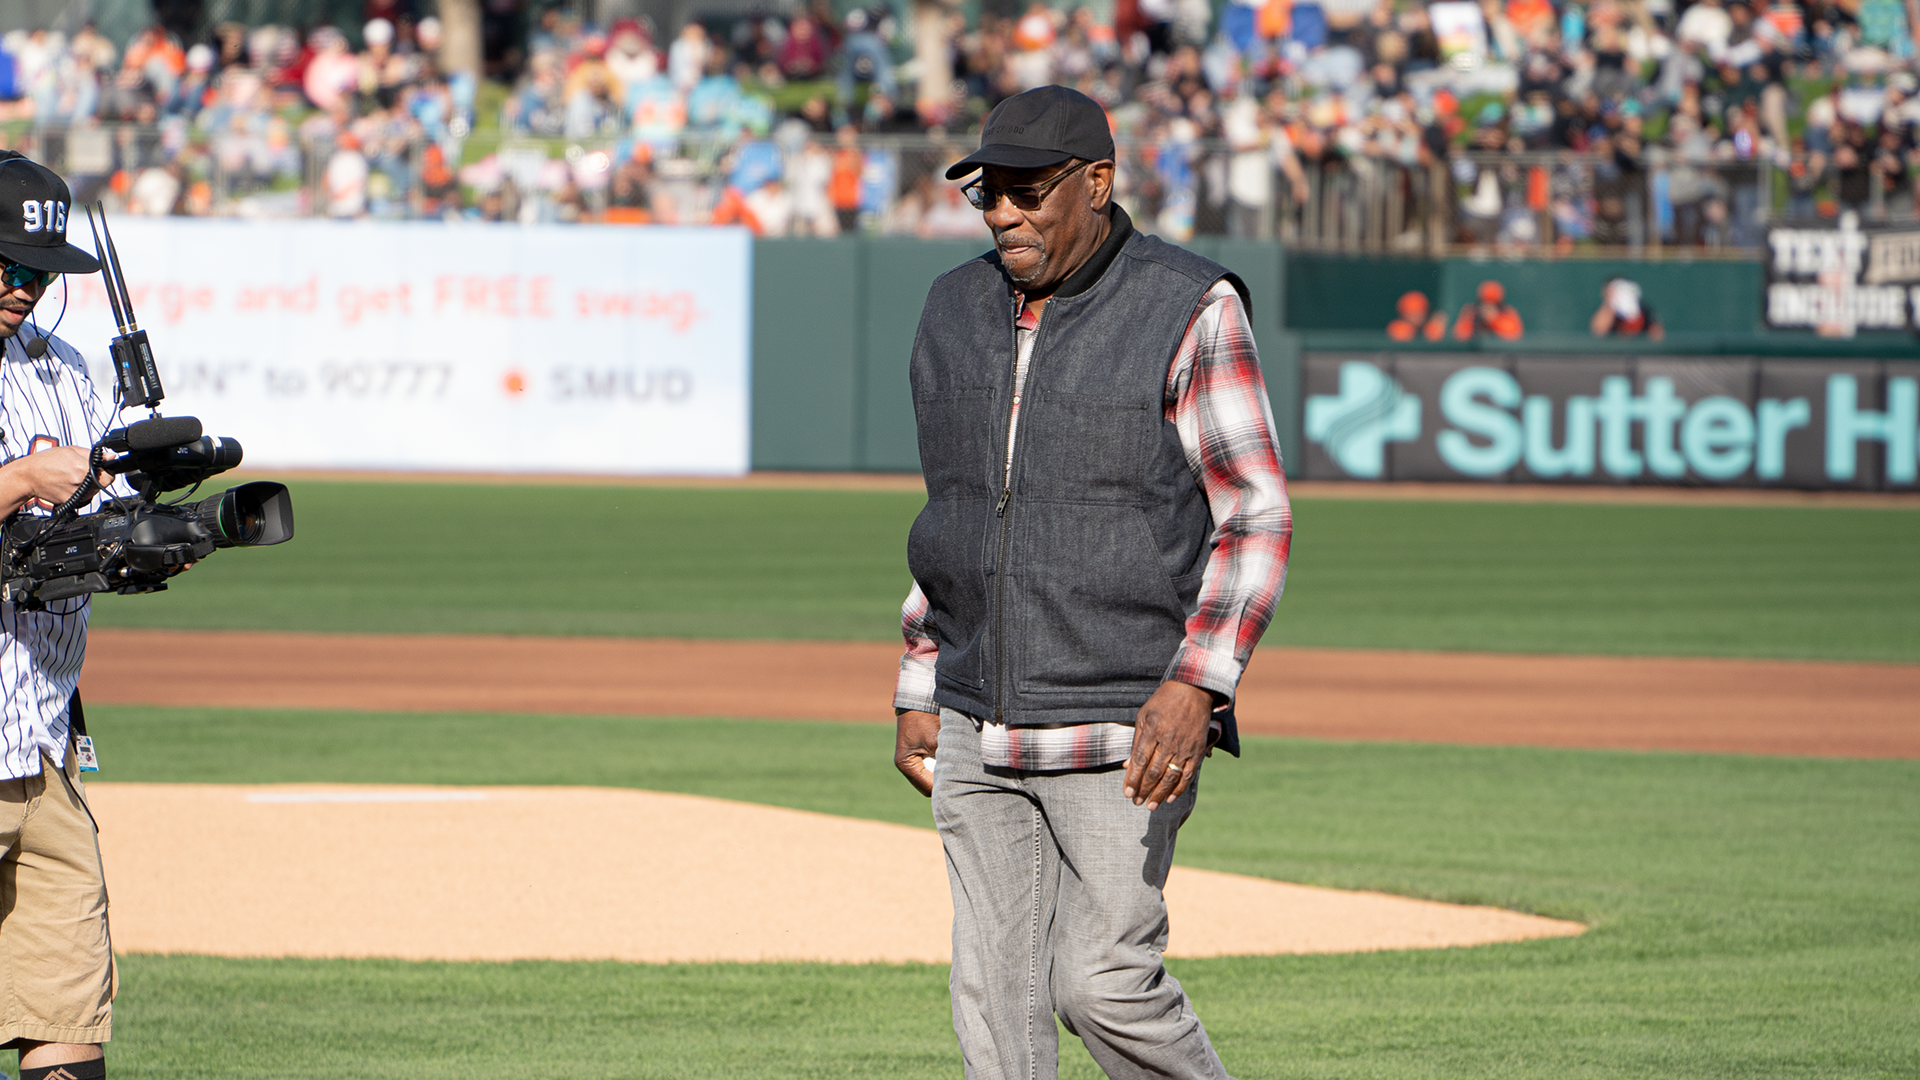 Baseball Digest honors Dusty Baker with Lifetime Achievement Award